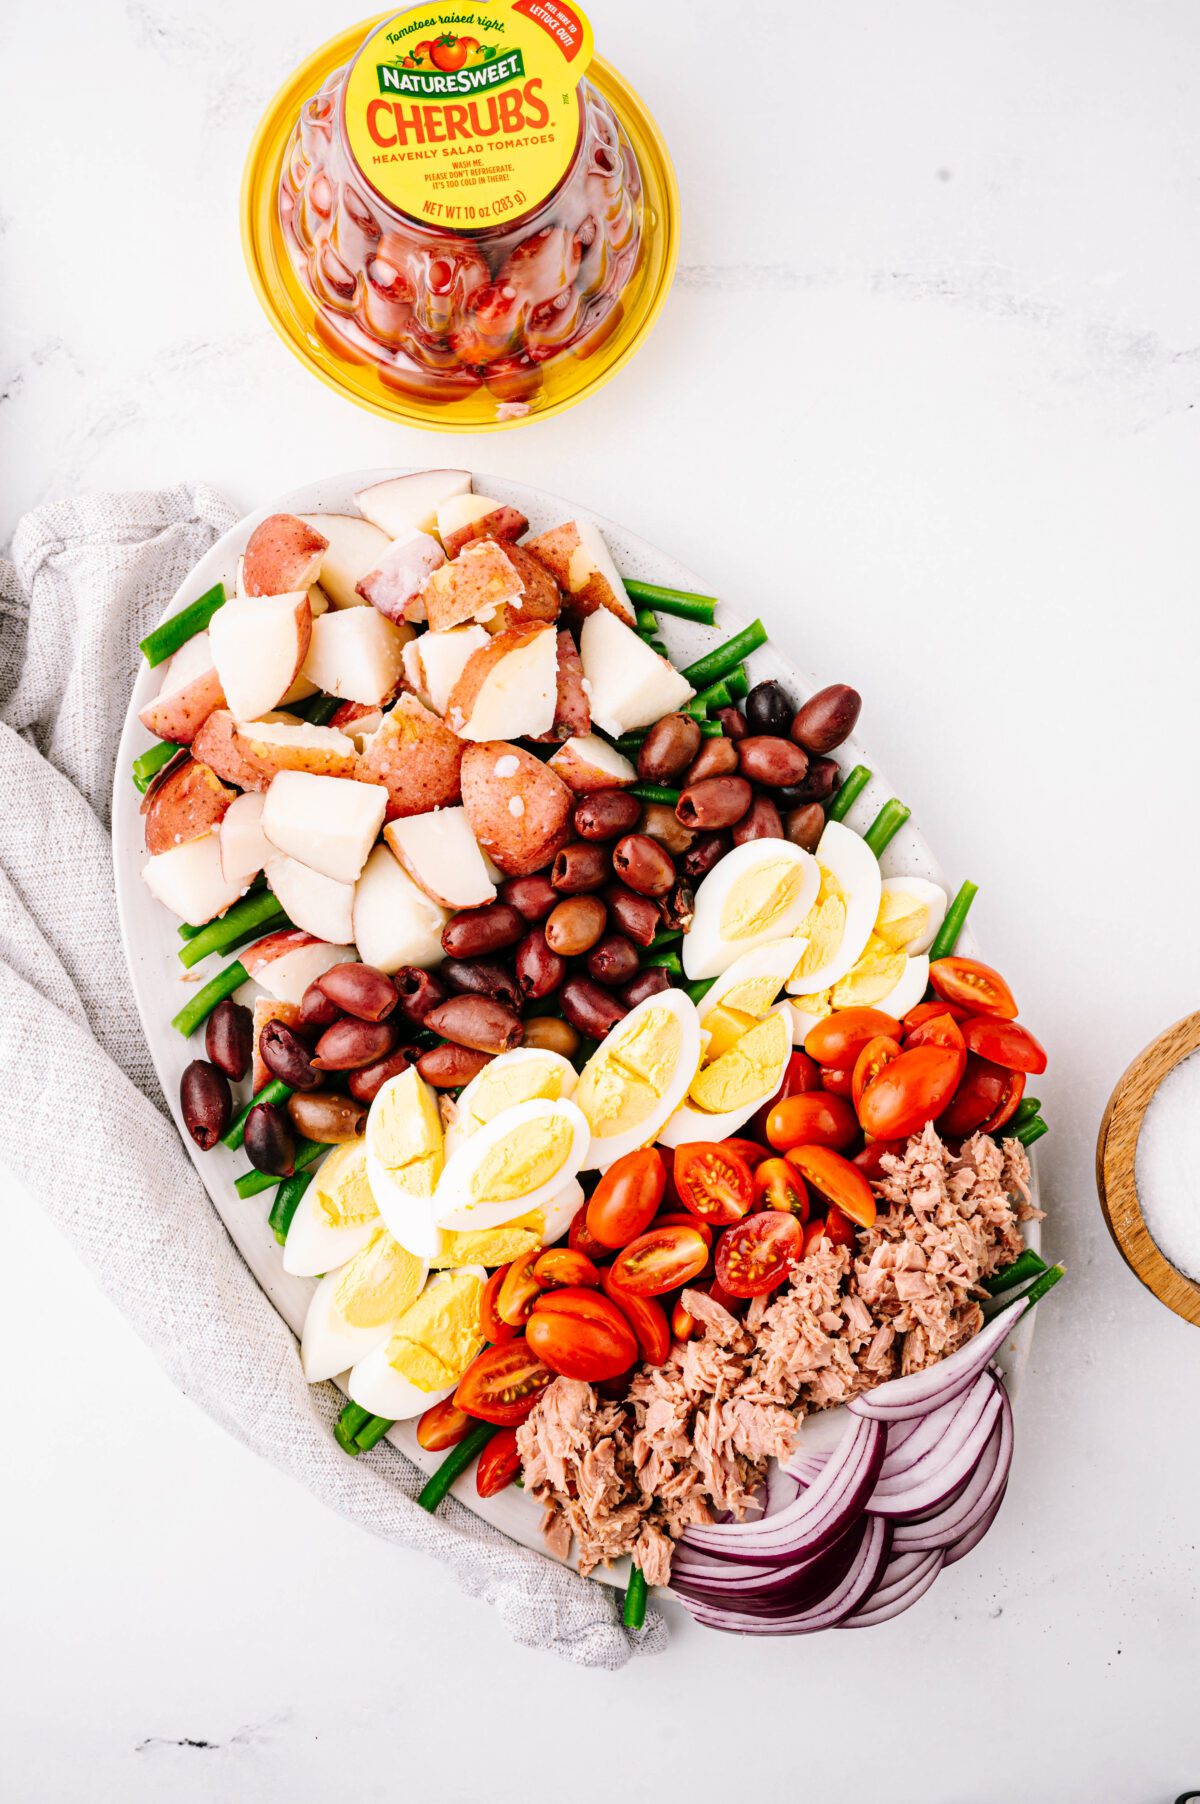 Vertical view of Nicoise salad with Cherubs® in background